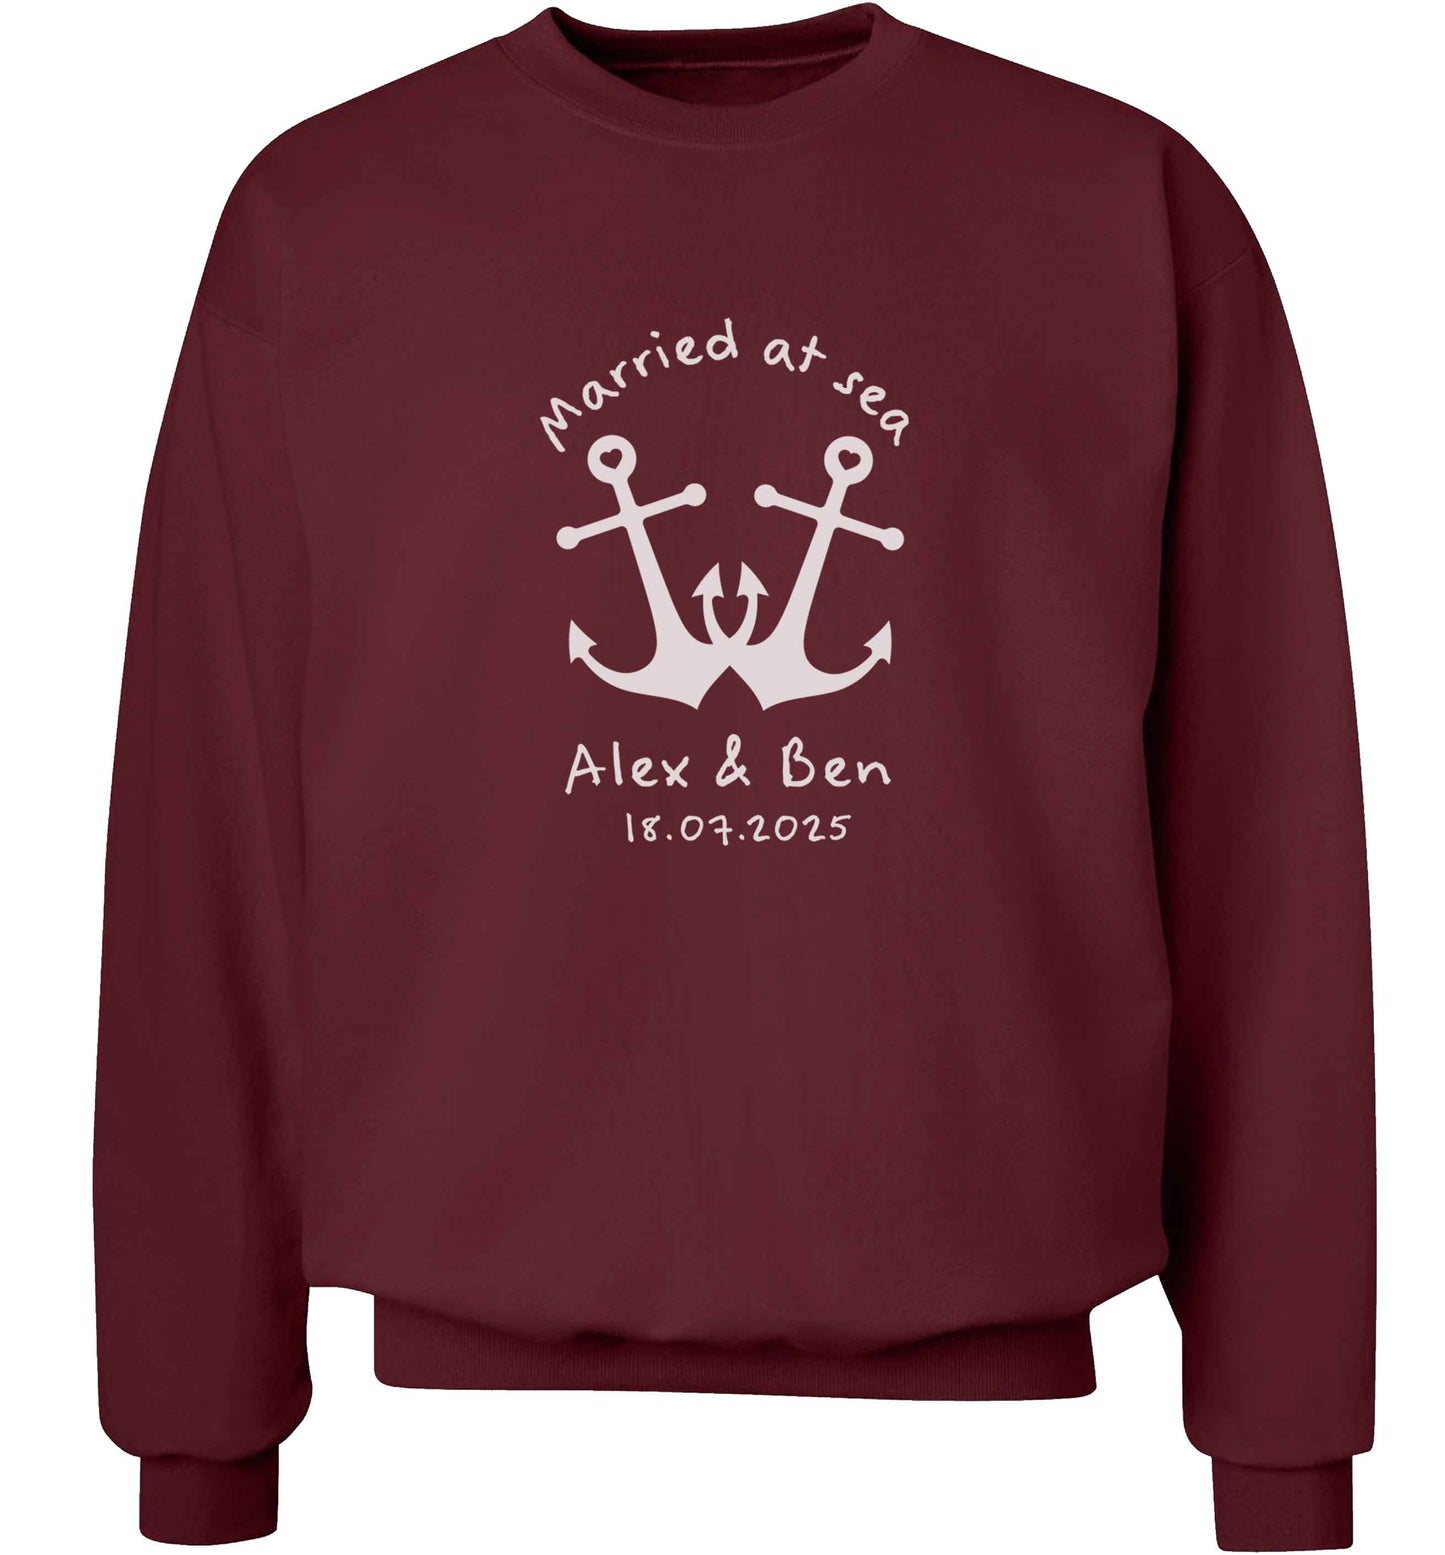 Married at sea blue anchors adult's unisex maroon sweater 2XL